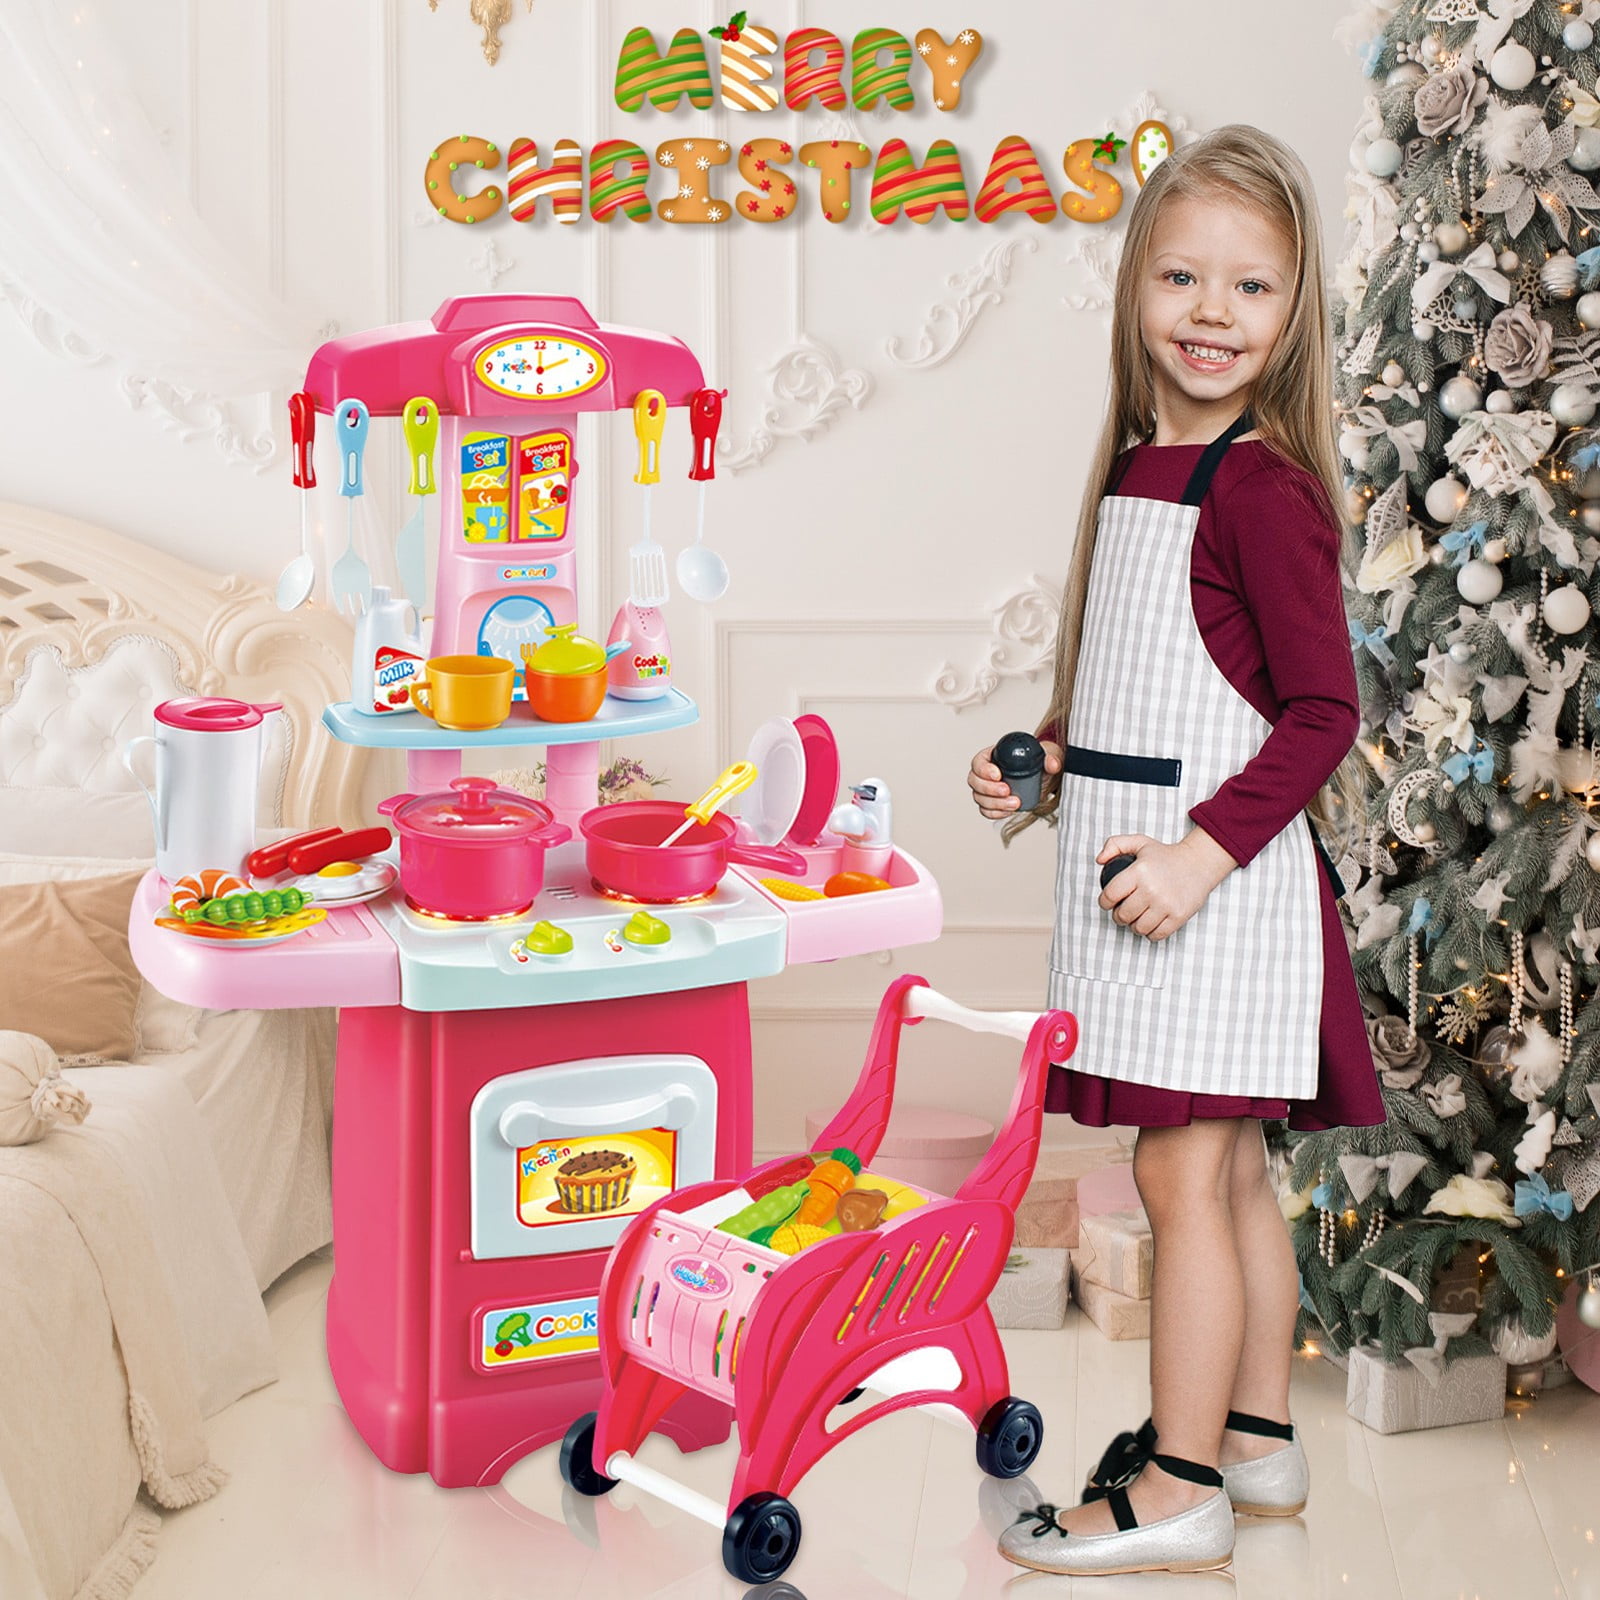 lkoezi Children Grocery Store Playset Kids Supermarket Shopping Set Pretend Play Shopping Grocery Store w/Shopping Cart & Scanner Simulation Vending Machine with Light and Sound Multicolour 